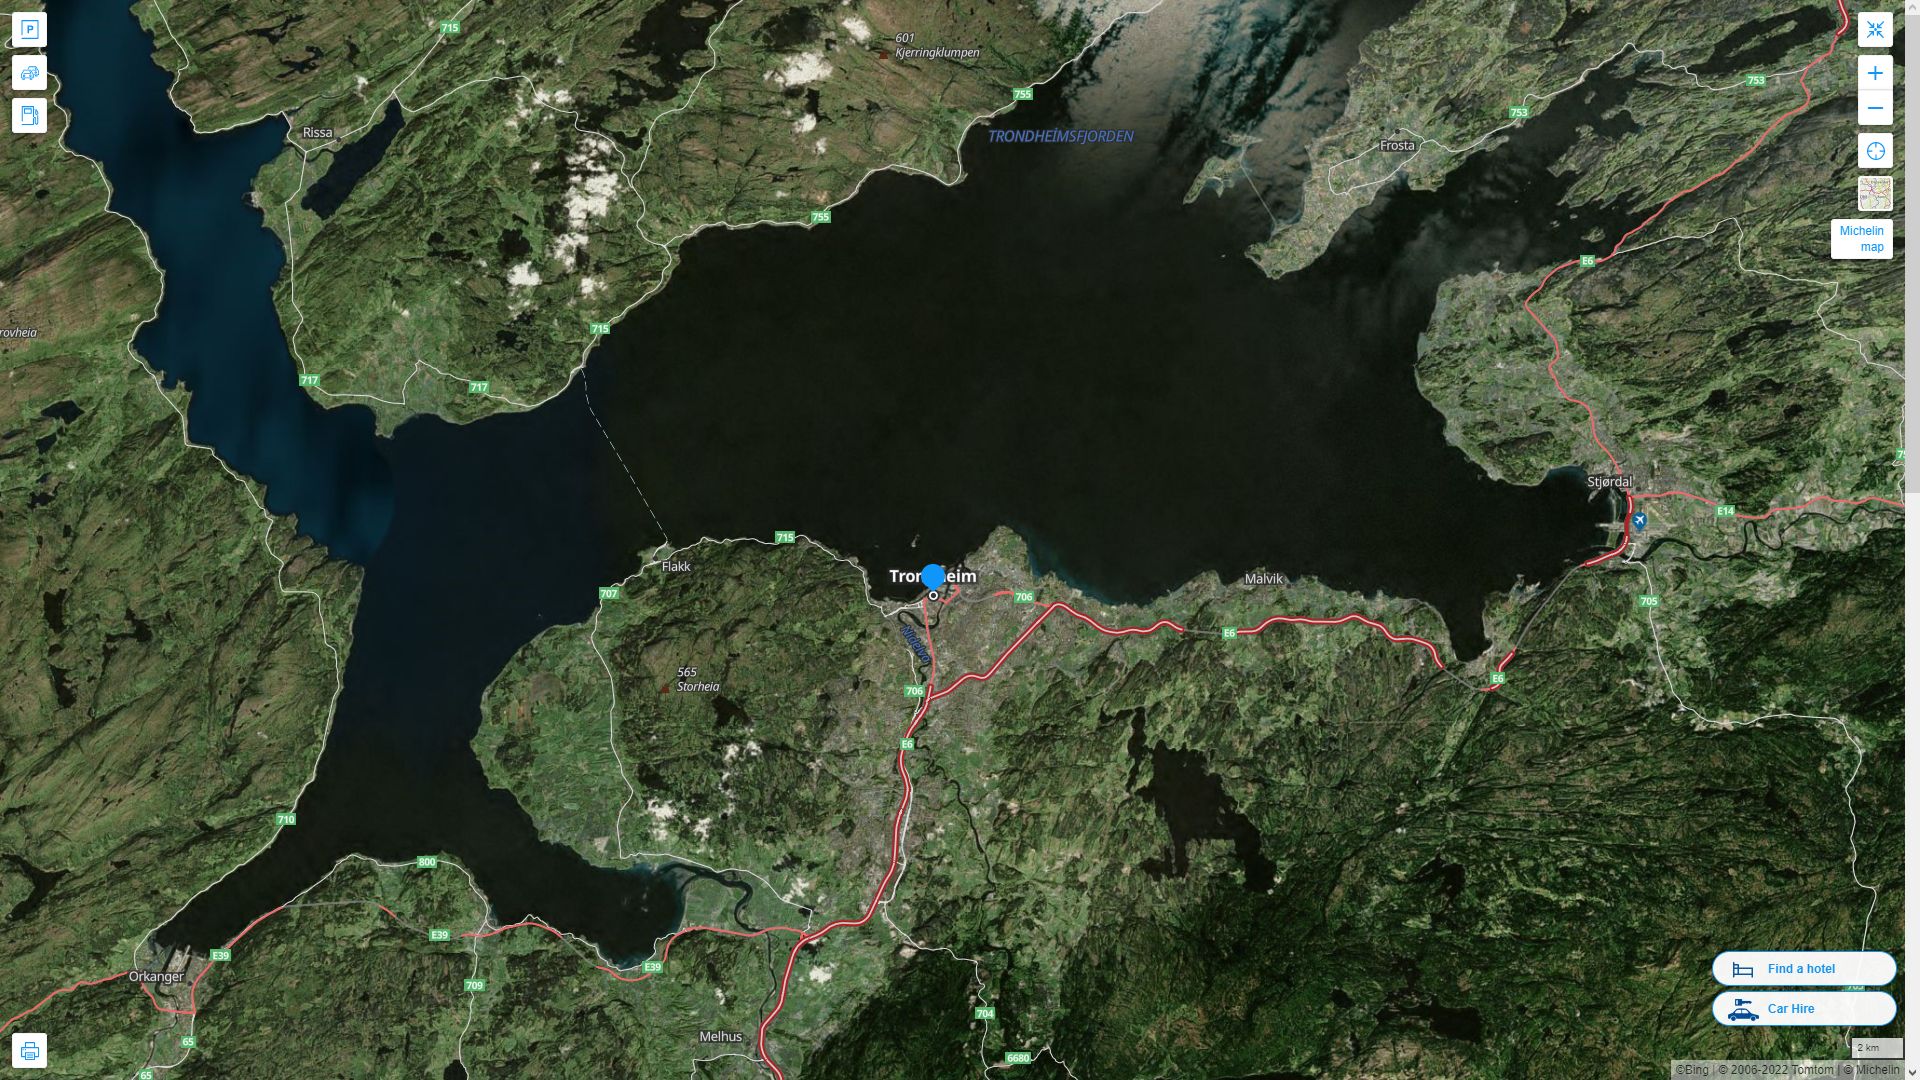 Trondheim Highway and Road Map with Satellite View